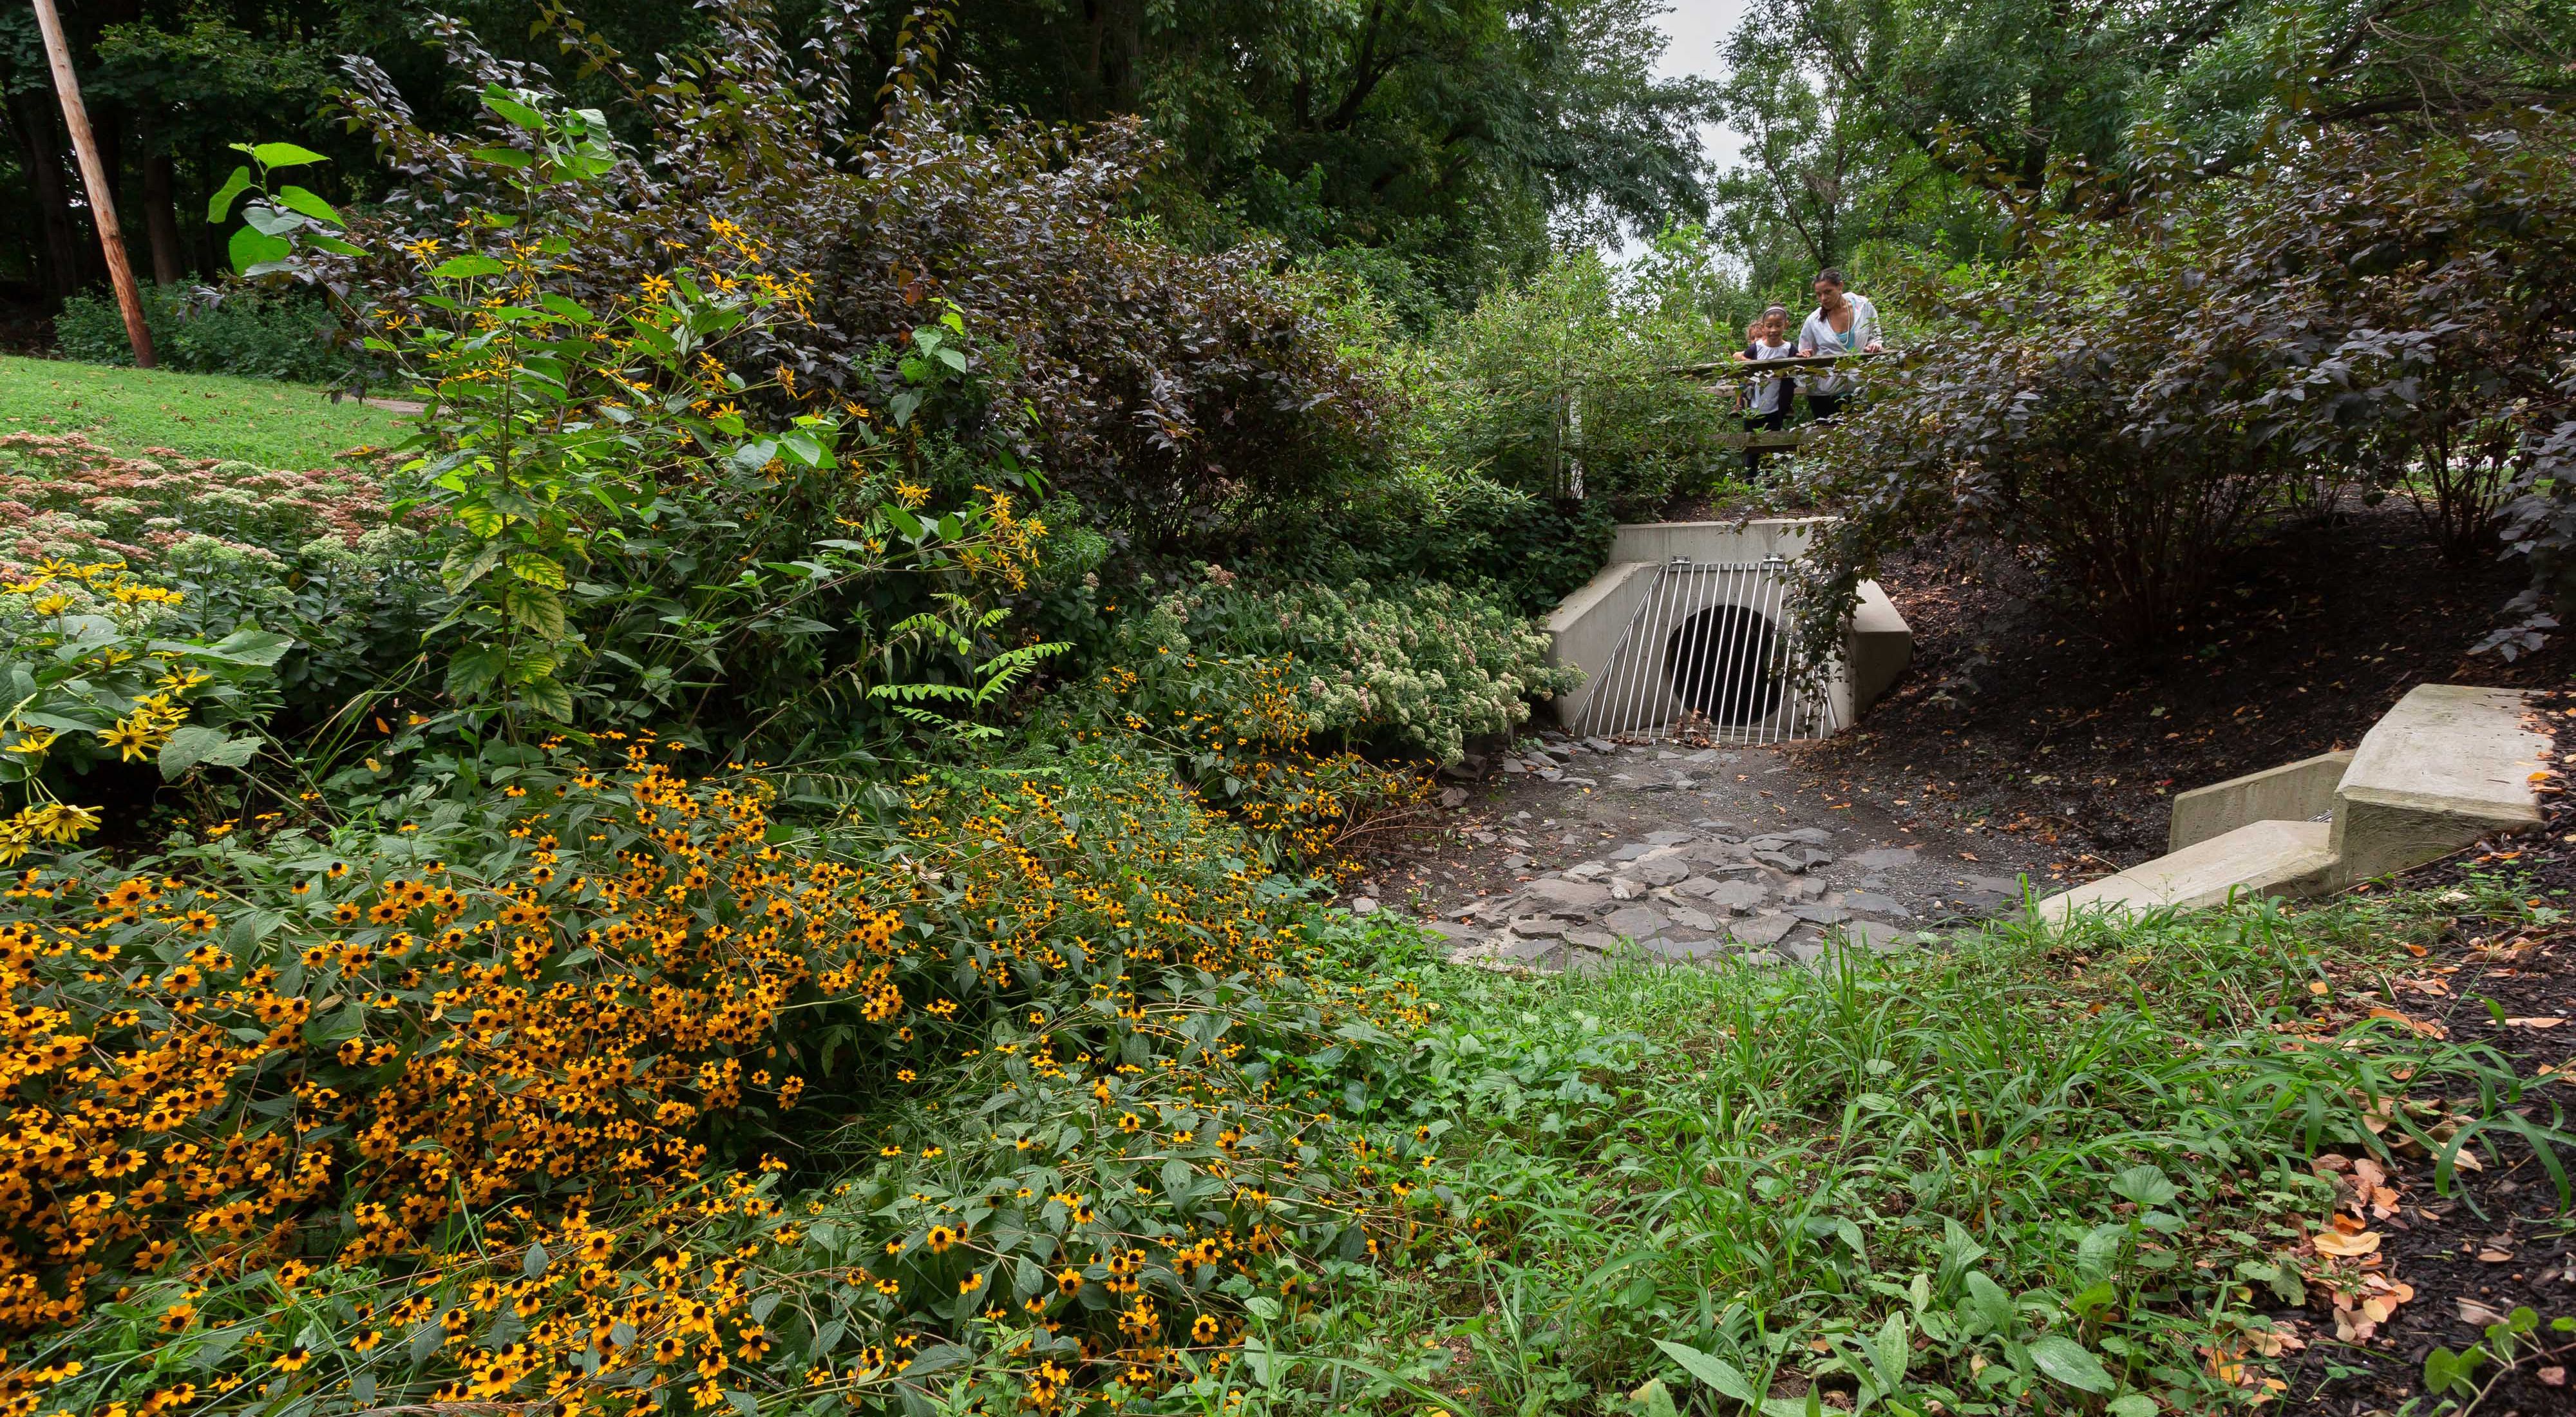 a culvert sitting under a bridge is surrounded by plants and flowers